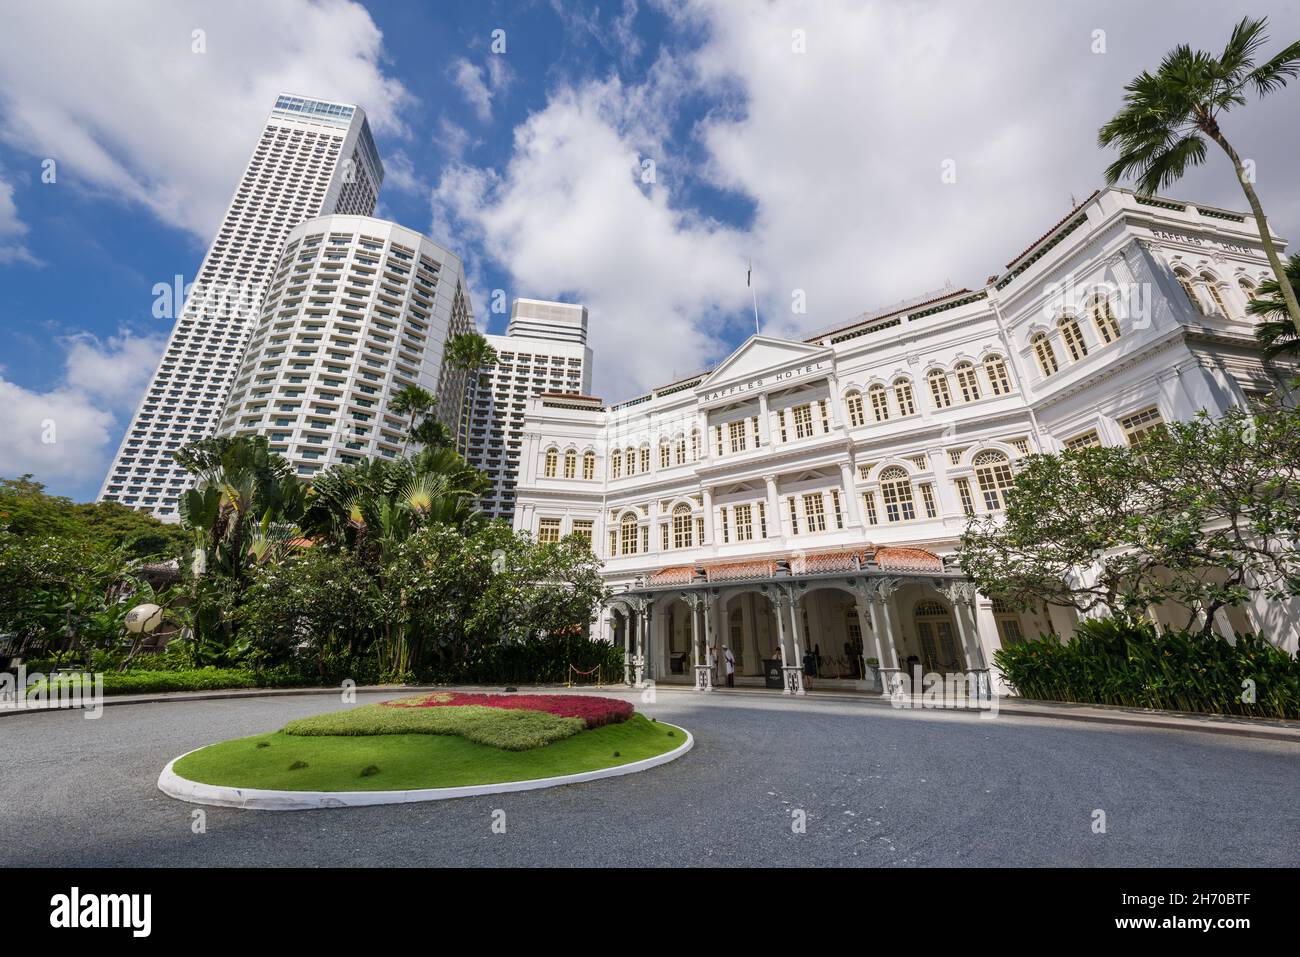 Singapore, 23 Feb 2016: Raffles Hotel is a colonial-style luxury hotel established in 1887. The hotel was named after British statesman Sir Thomas Sta Stock Photo